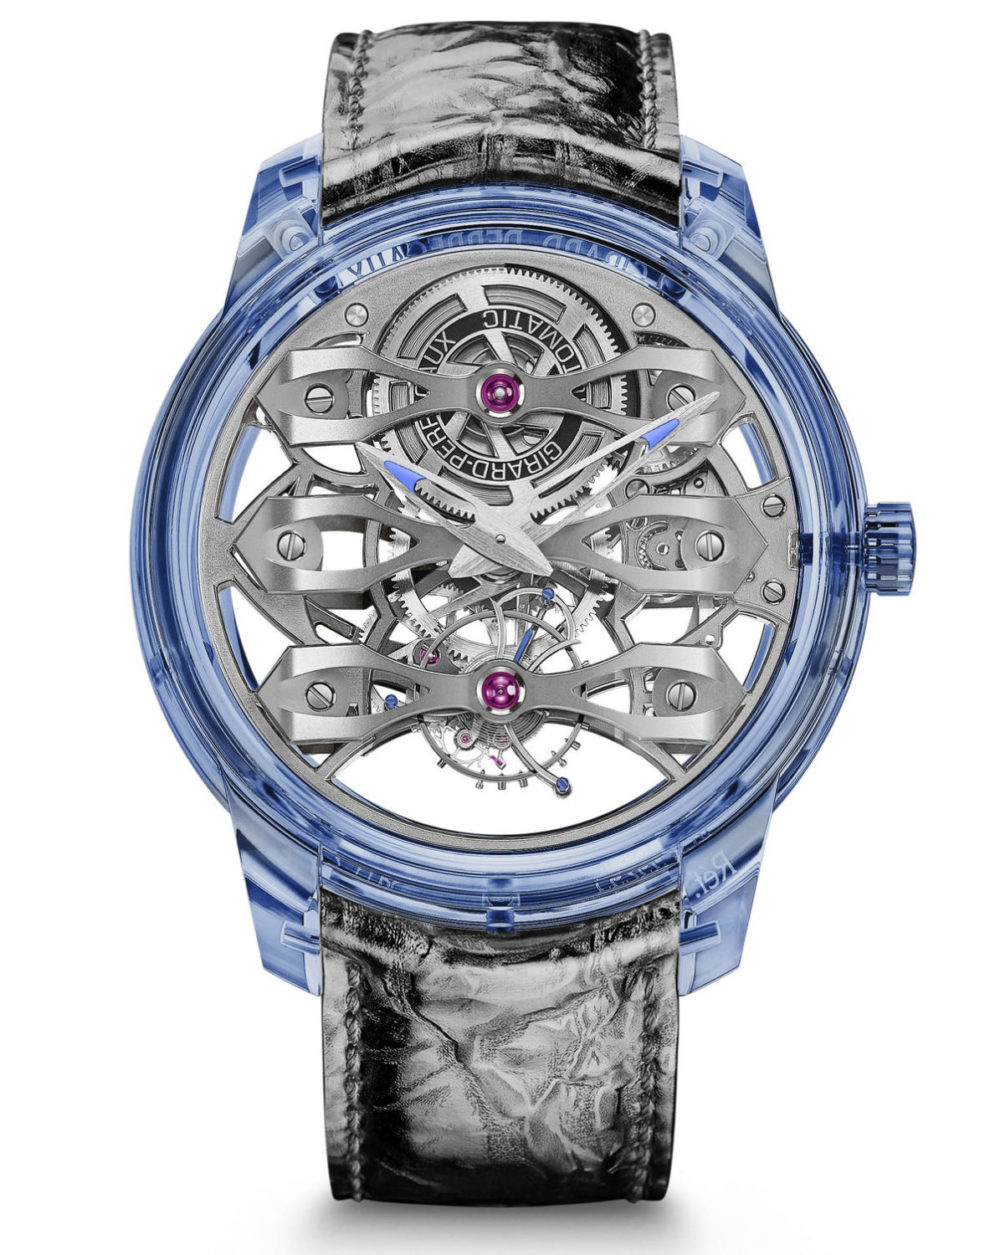 The Girard-Perregaux Quasar Azure watch is limited to just 8 pieces